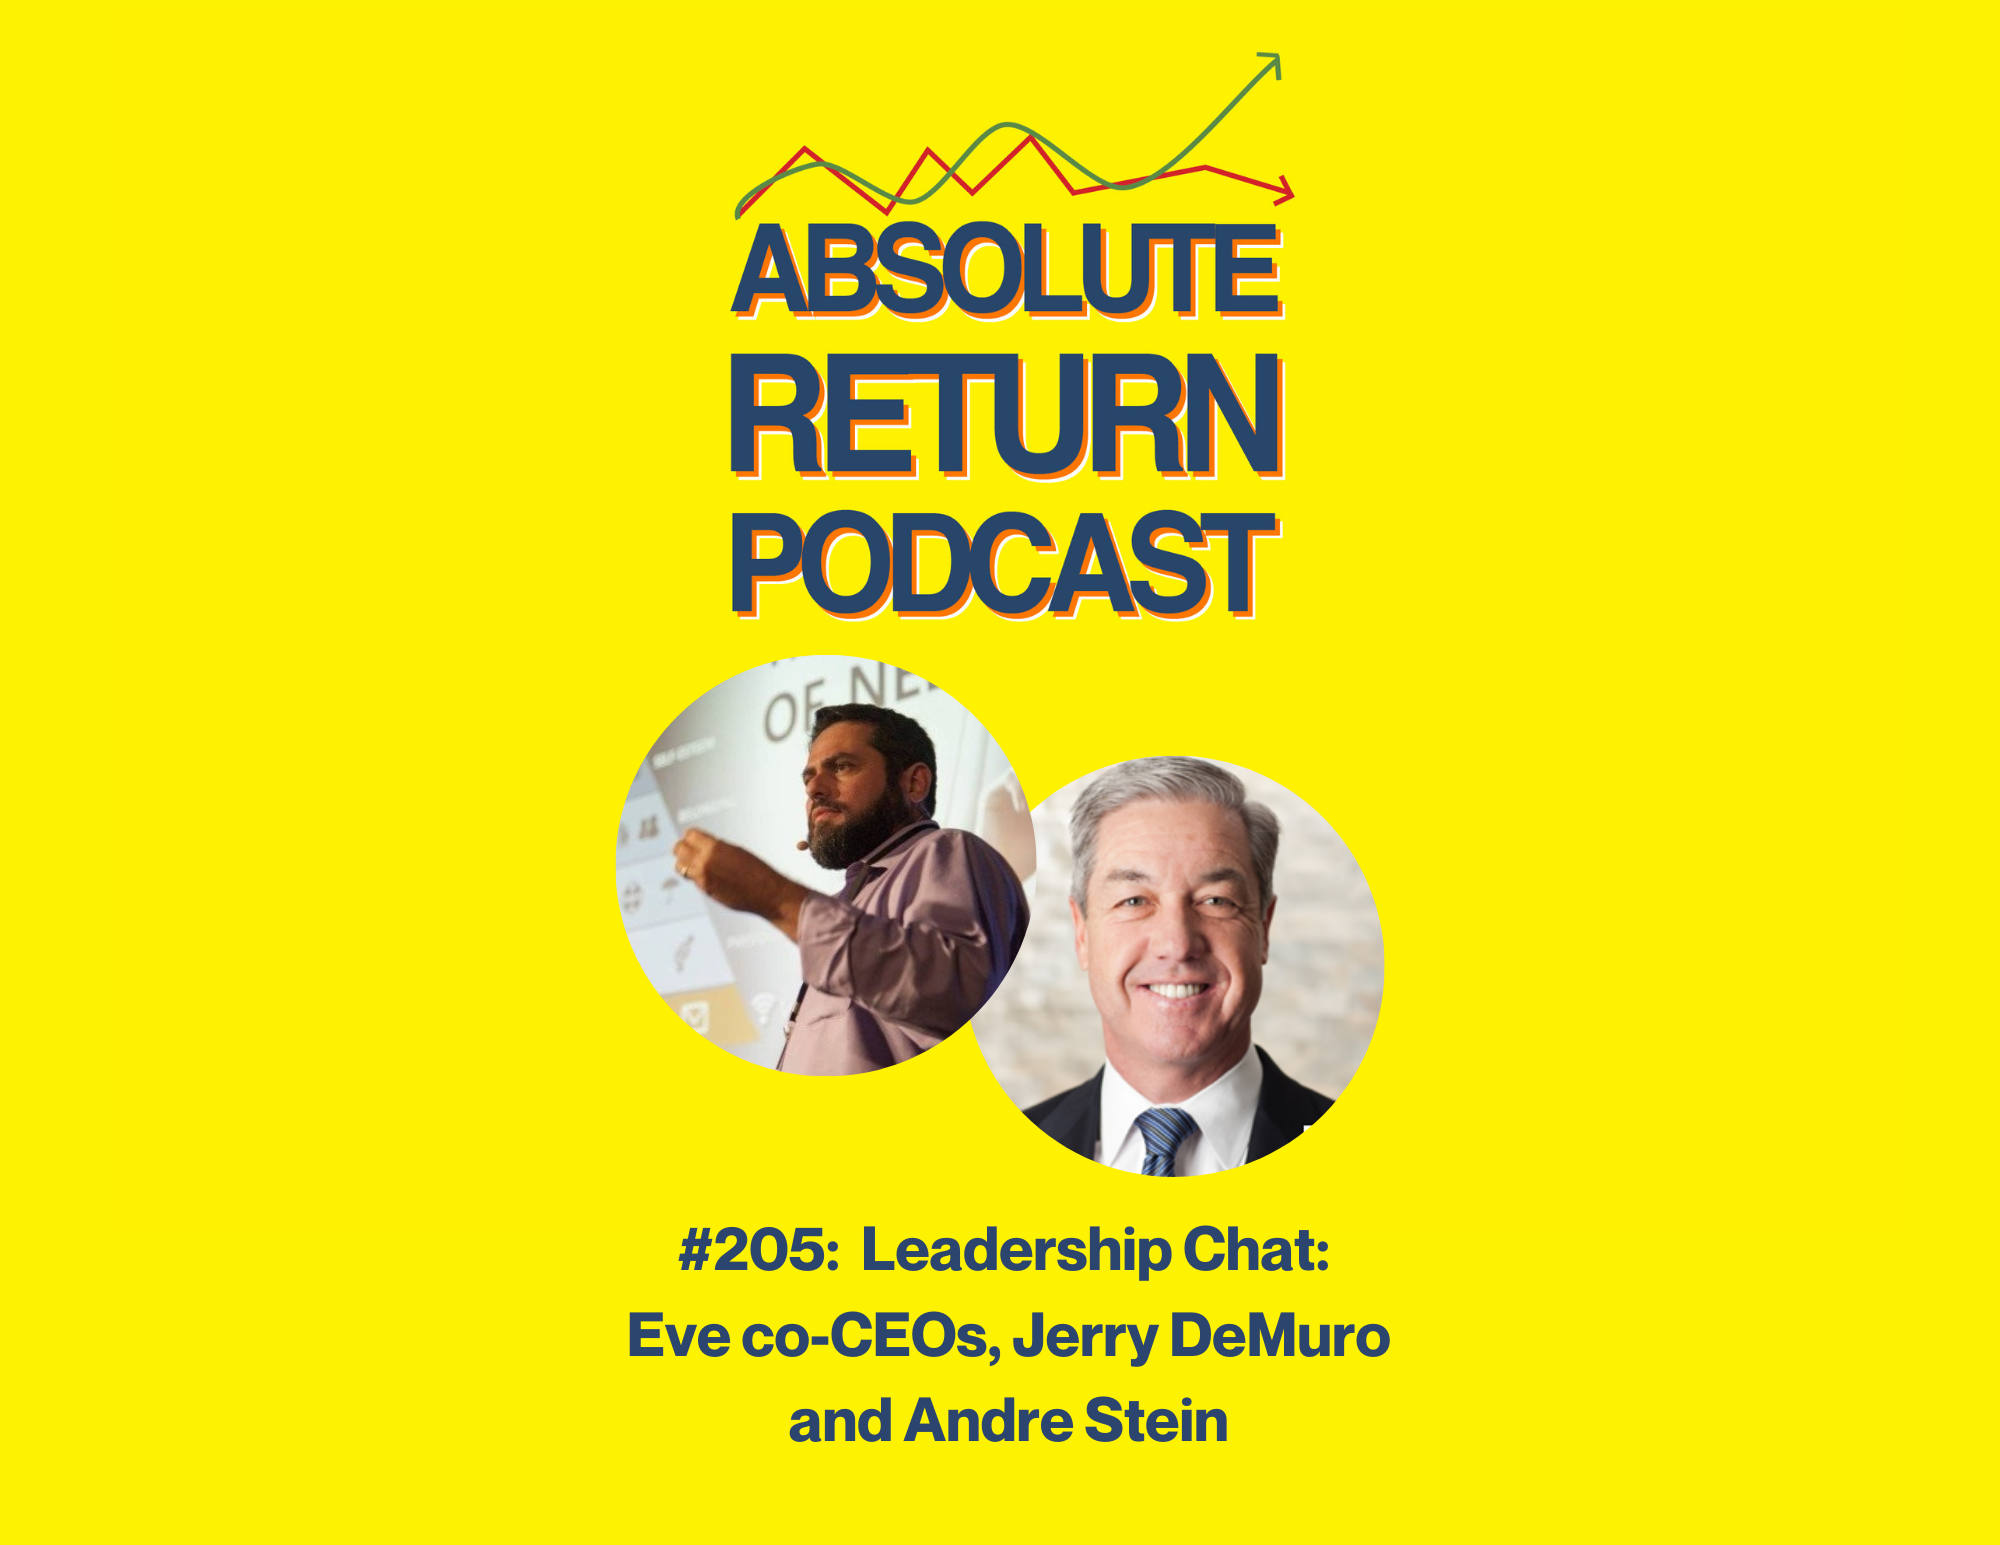 Absolute Return Podcast #205: Leadership Chat: Eve co-CEOs, Jerry DeMuro and Andre Stein